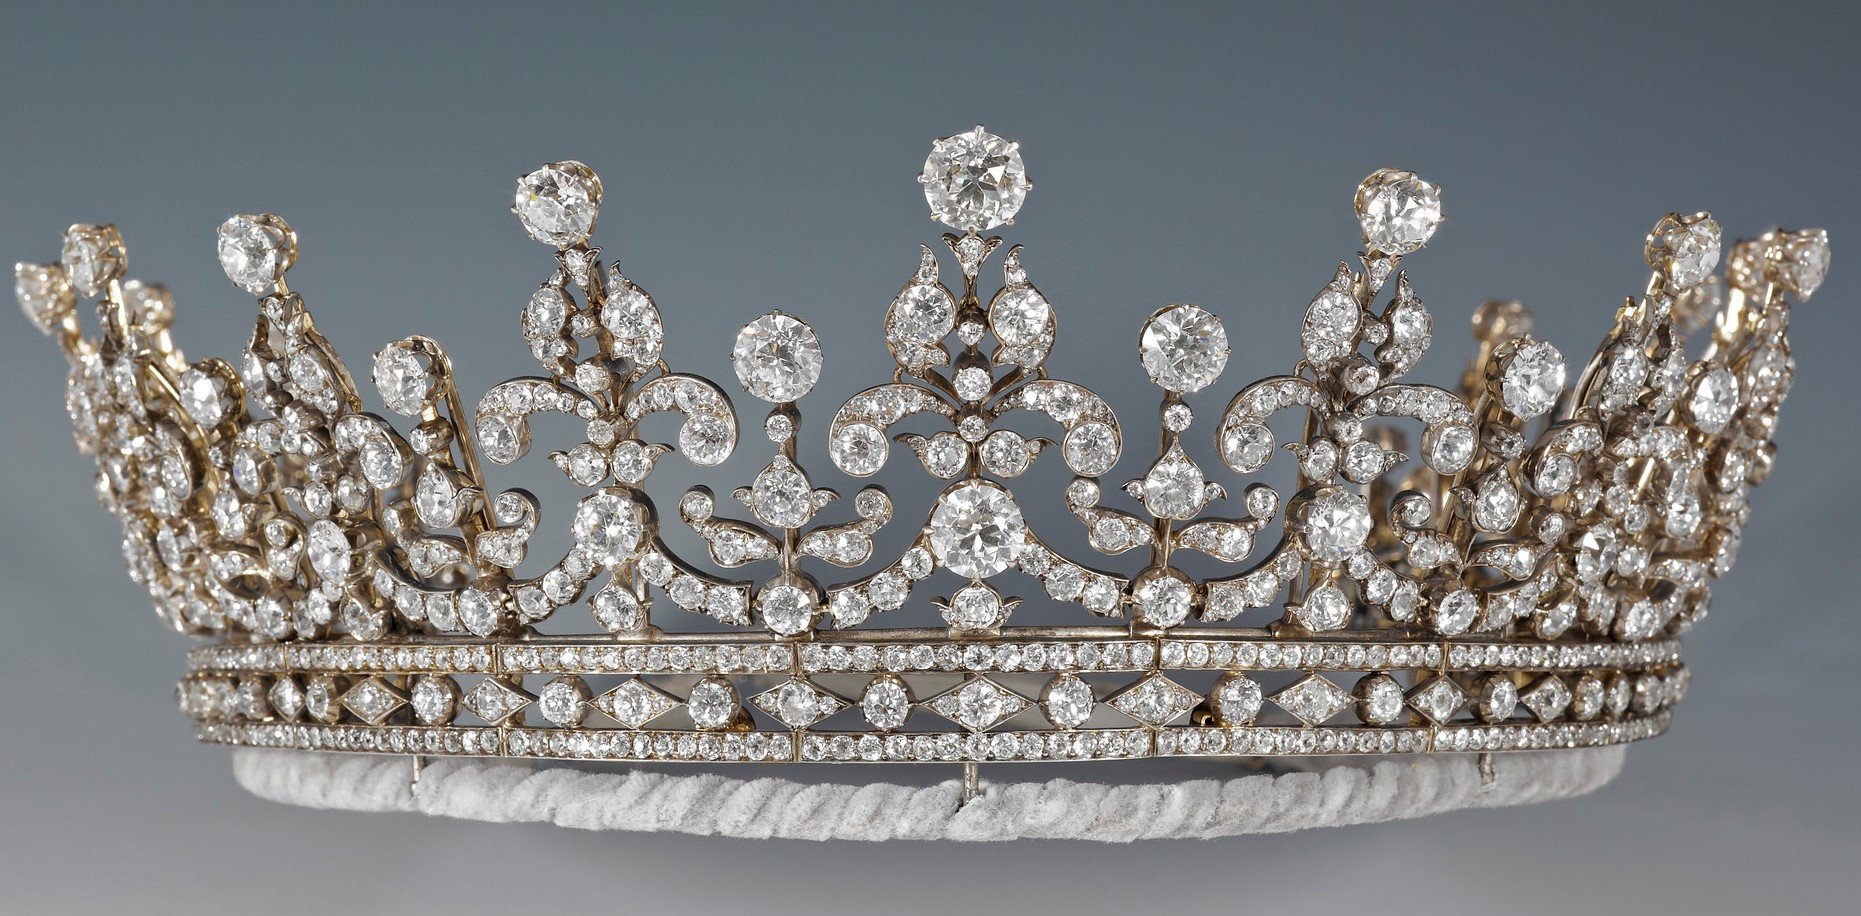 Queen Mary's Girls of Great Britain and Ireland tiara